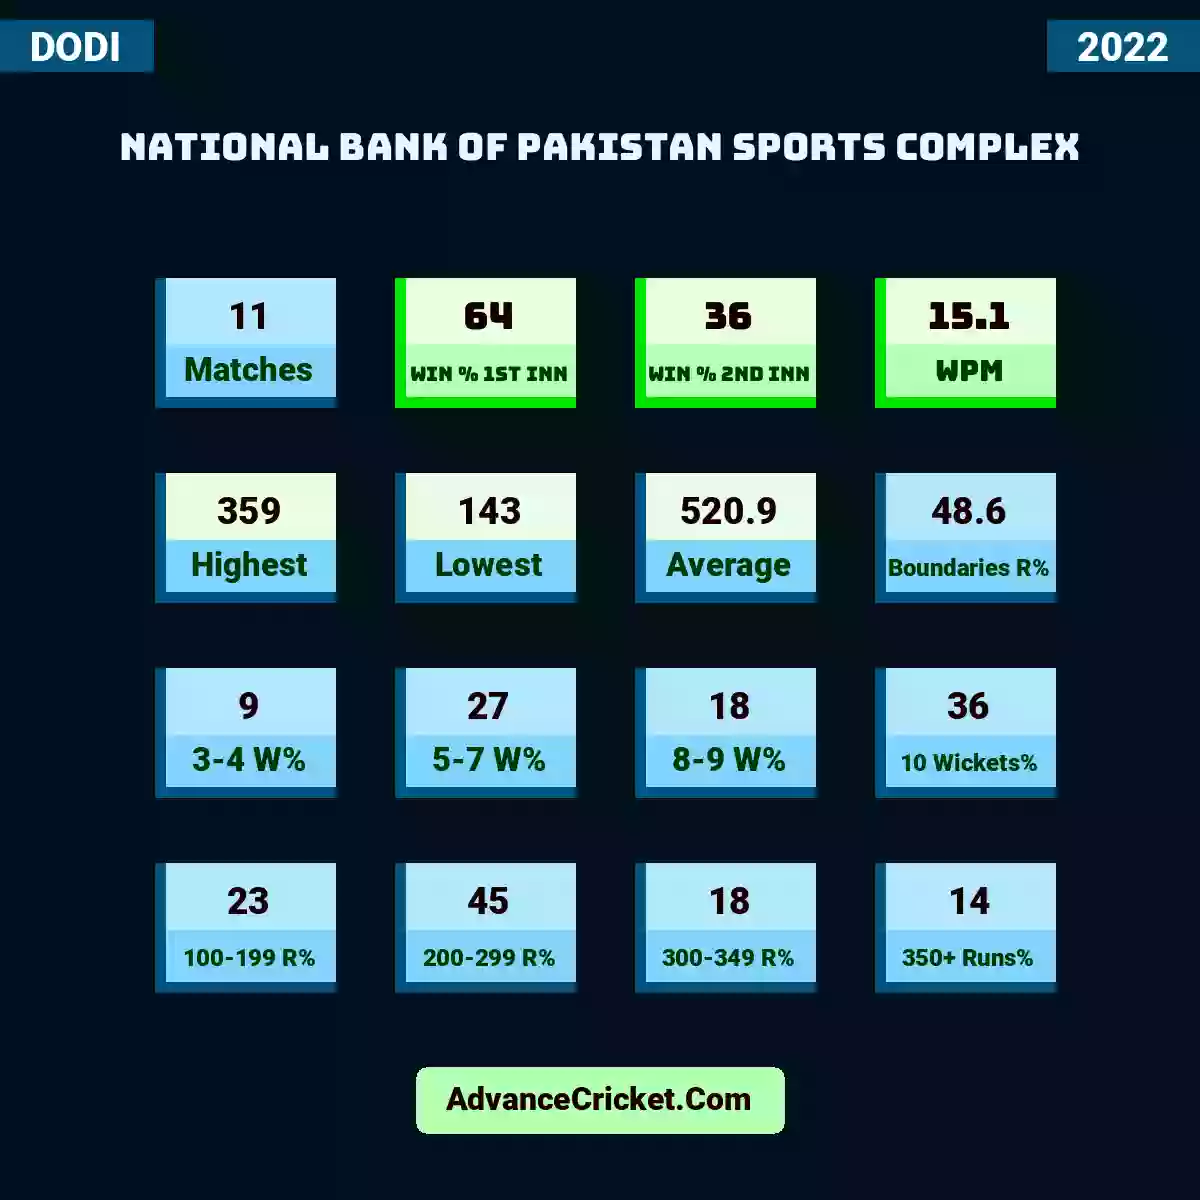 Image showing National Bank of Pakistan Sports Complex with Matches: 11, Win % 1st Inn: 64, Win % 2nd Inn: 36, WPM: 15.1, Highest: 359, Lowest: 143, Average: 520.9, Boundaries R%: 48.6, 3-4 W%: 9, 5-7 W%: 27, 8-9 W%: 18, 10 Wickets%: 36, 100-199 R%: 23, 200-299 R%: 45, 300-349 R%: 18, 350+ Runs%: 14